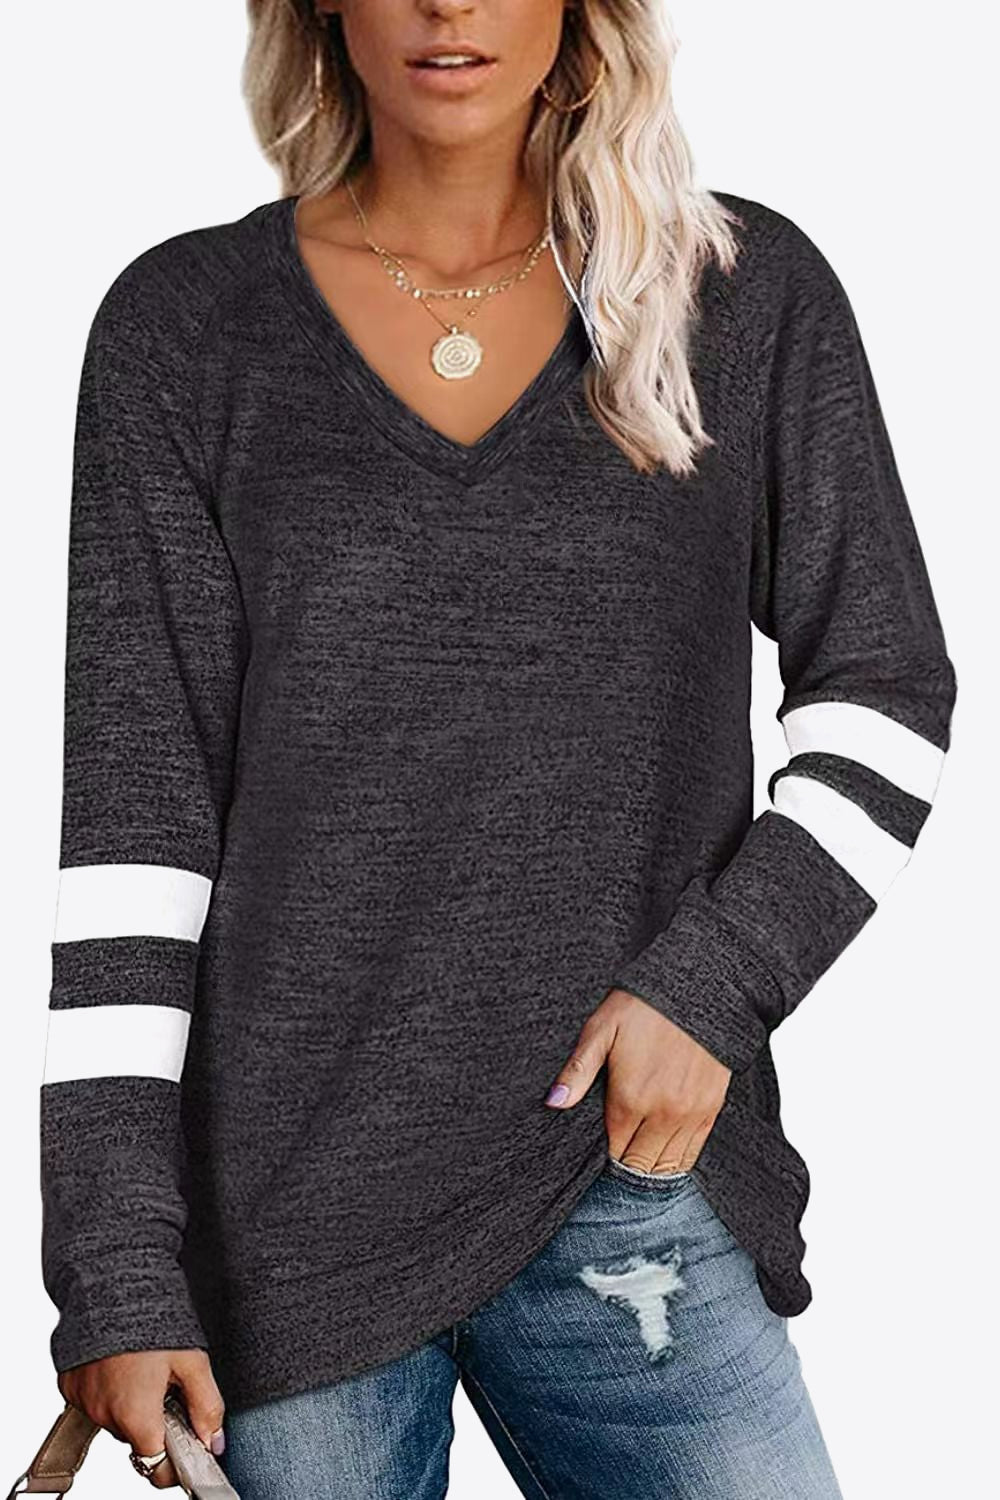 Striped Contrast Raglan Sleeve Top - Kawaii Stop - Casual Chic, Classic Style, Comfortable, Contrast Sleeve Top, Everyday Wear, H&L&L, Long Sleeve, Ship From Overseas, Stretchy Material, Stylish, T-Shirt, T-Shirts, Tee, Versatile Look, Wardrobe Essential, Women's Clothing, Women's Top